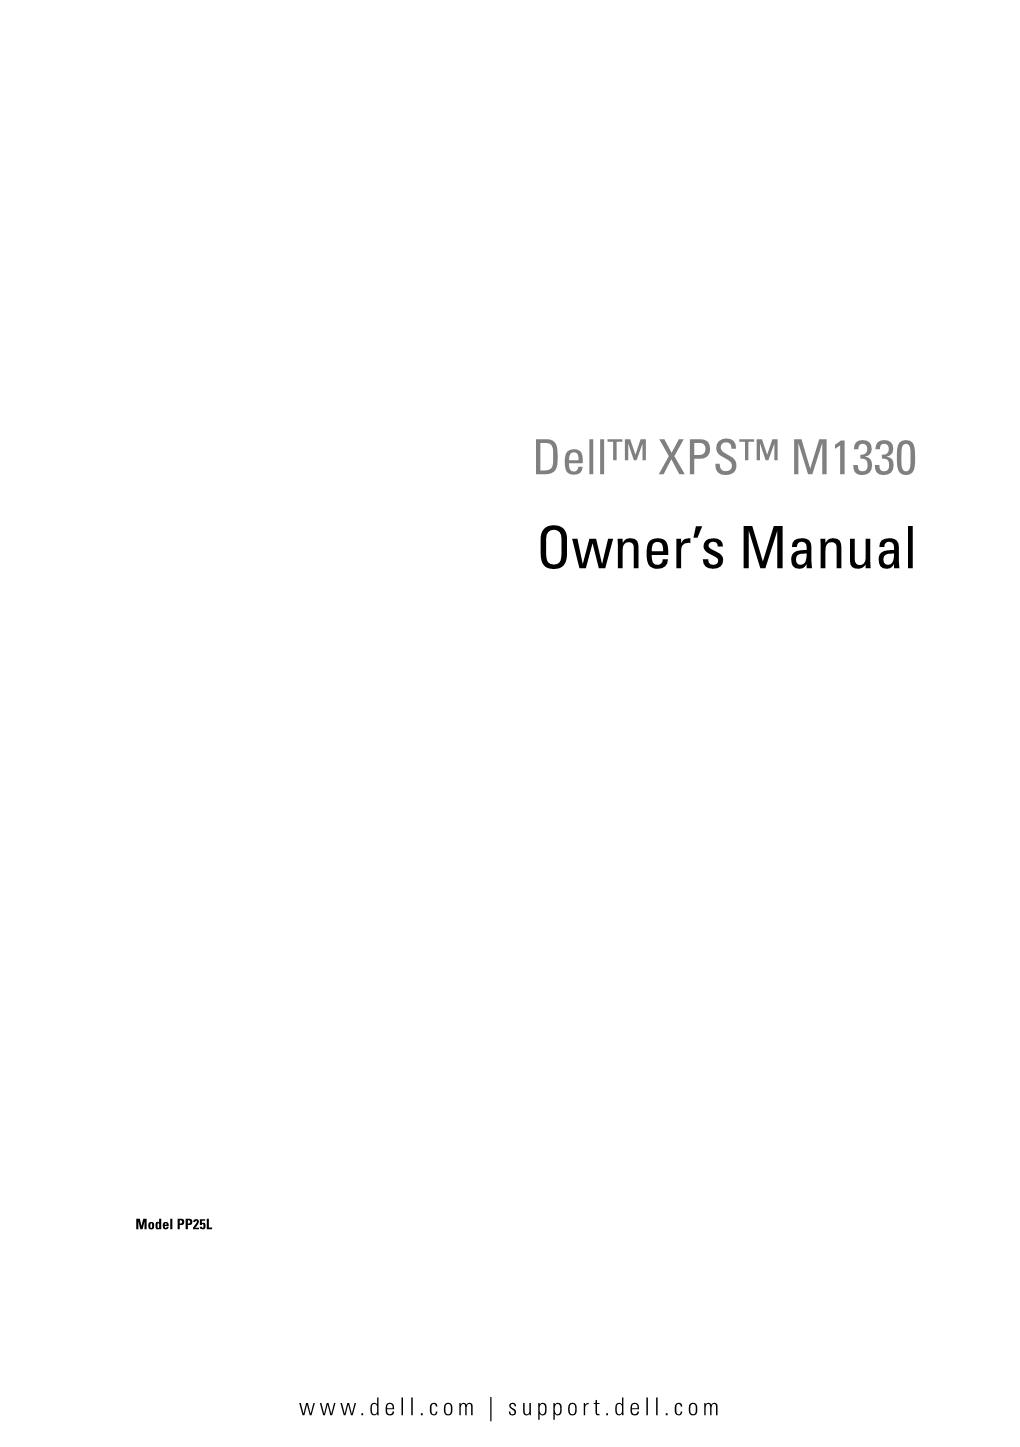 XPS M1330 Owner's Manual